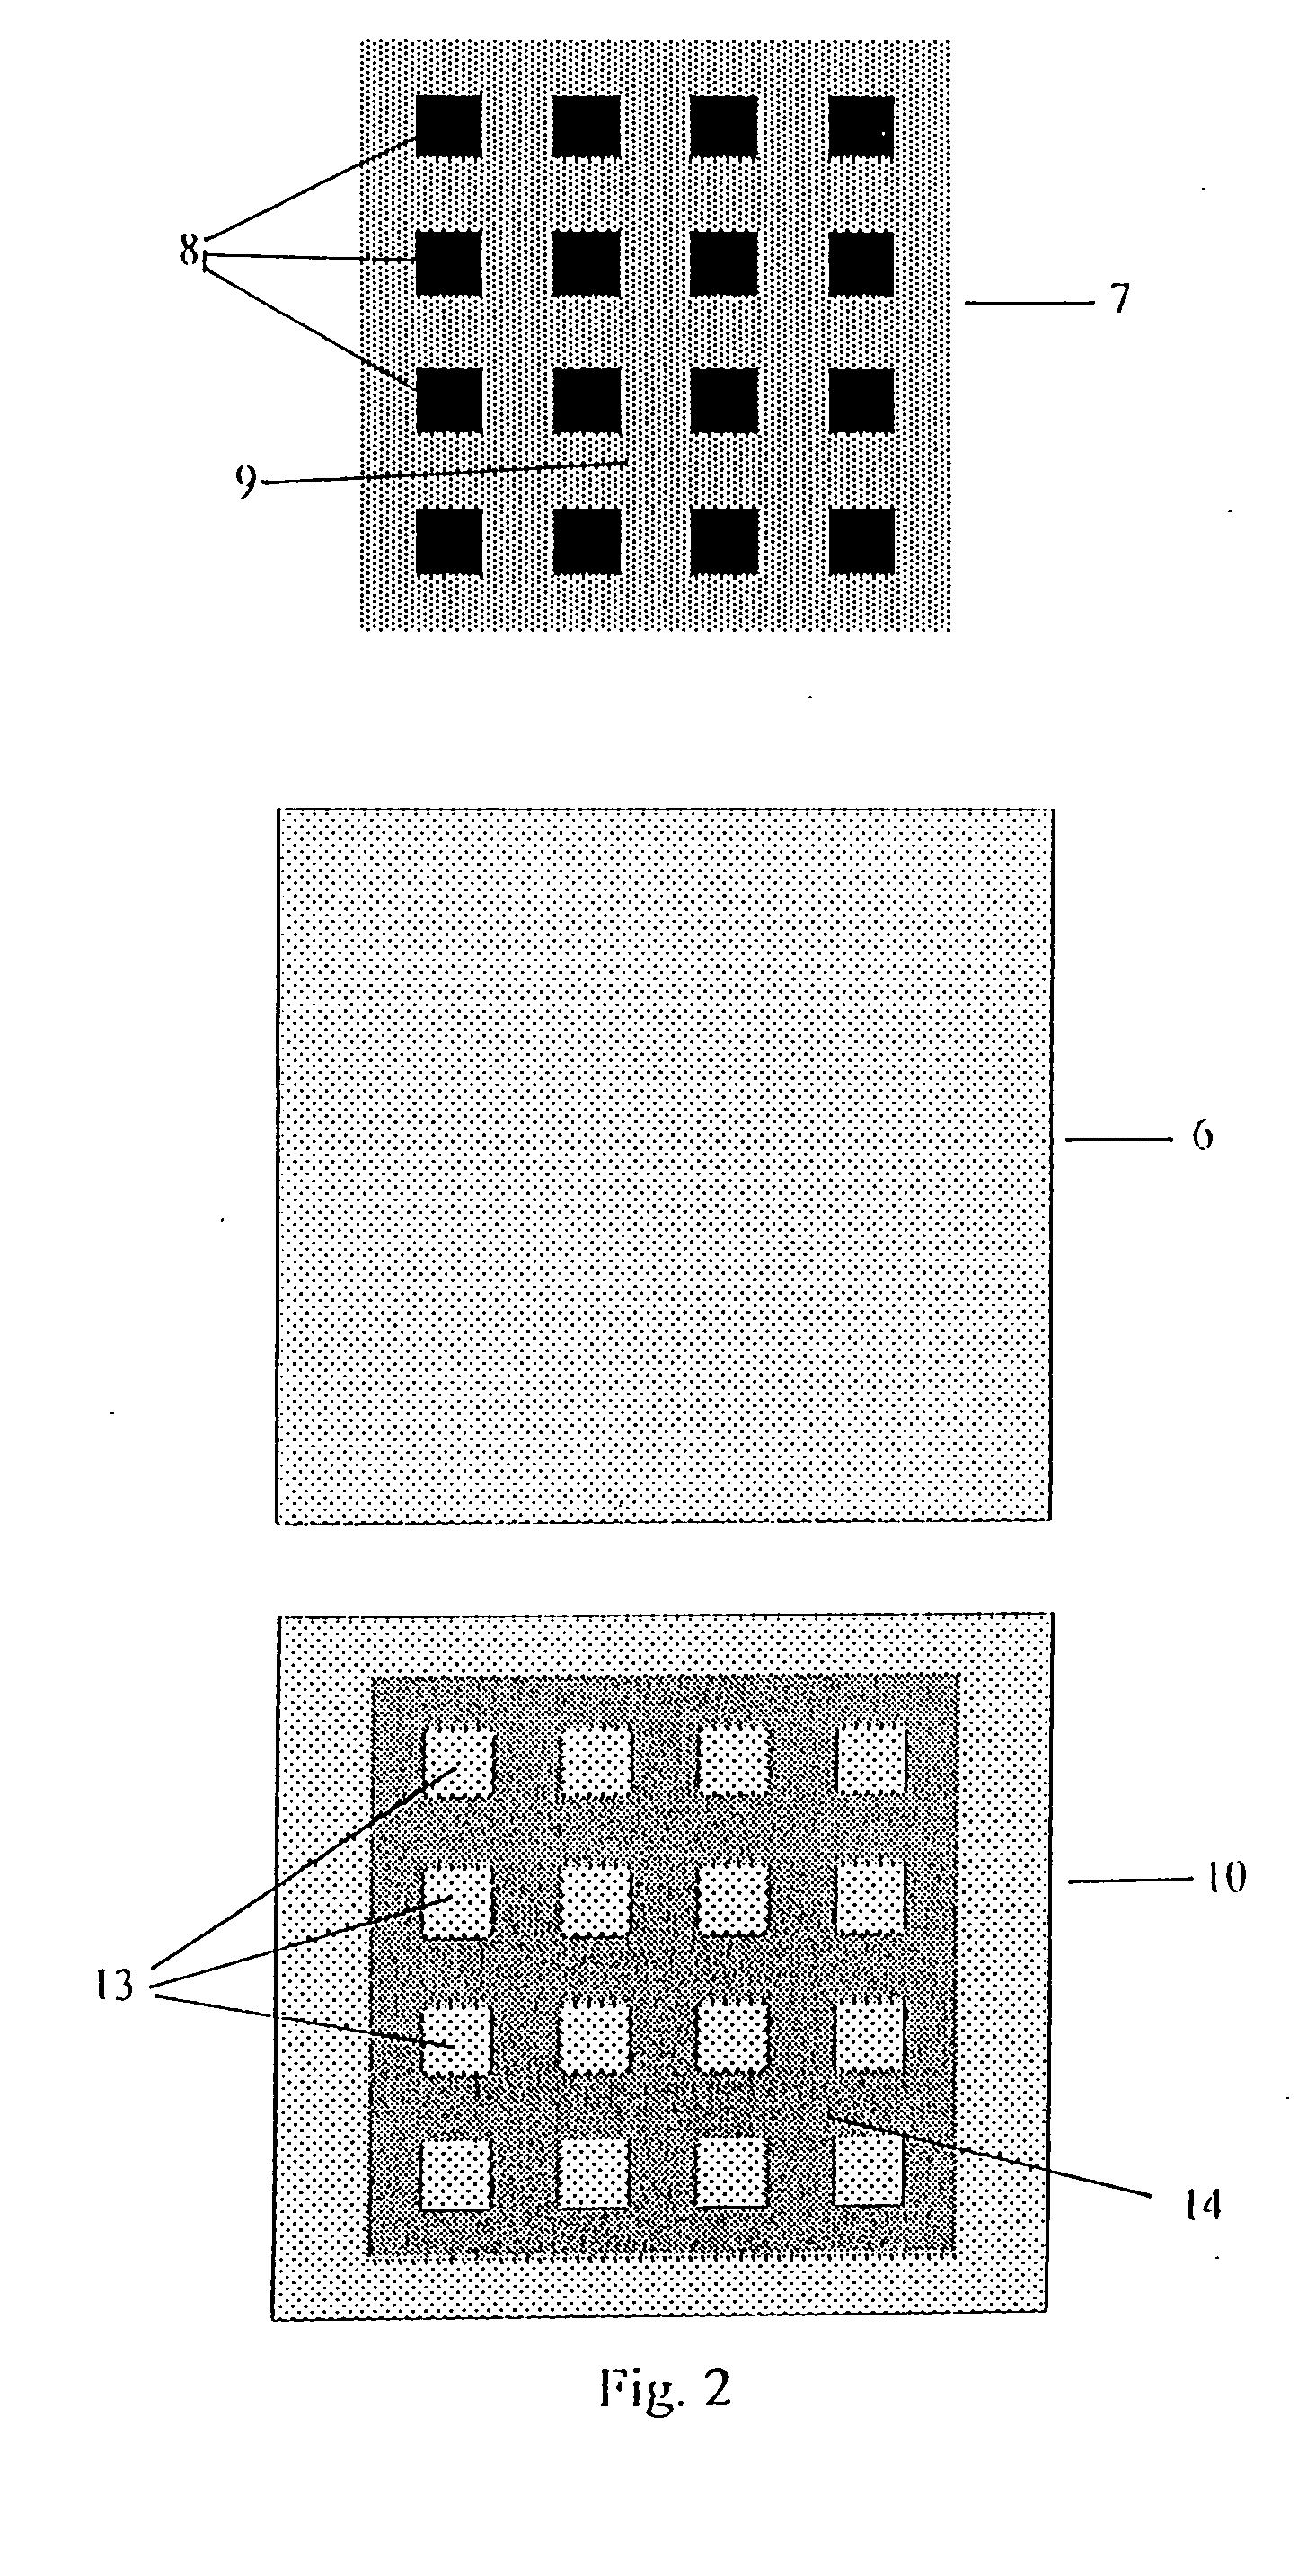 Electrochemical cell and method for its preparation